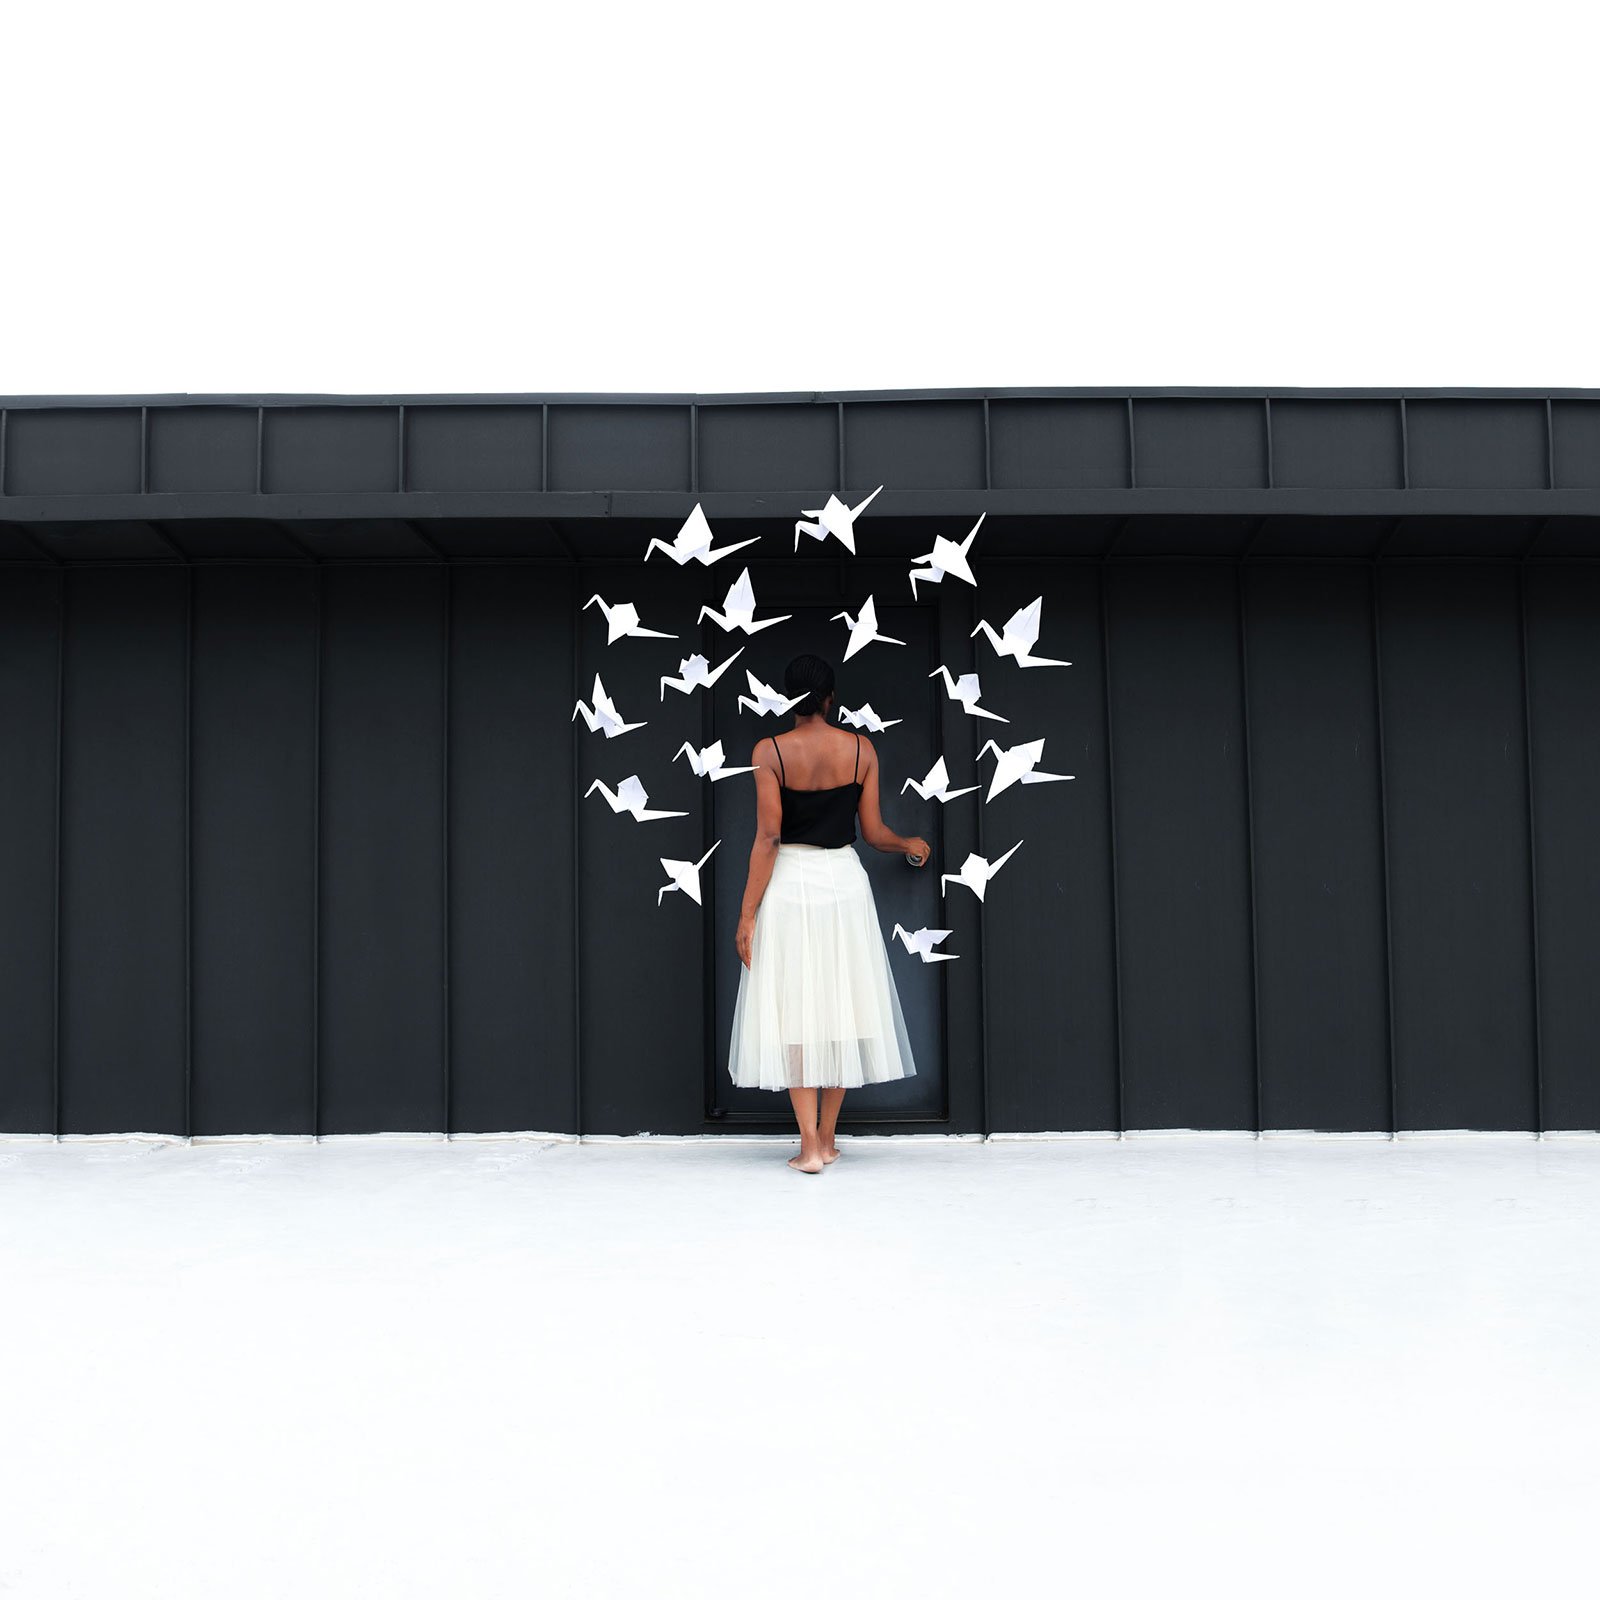 Woman with white skirt and black top facing black wooden background with paper cranes floating in a circle above